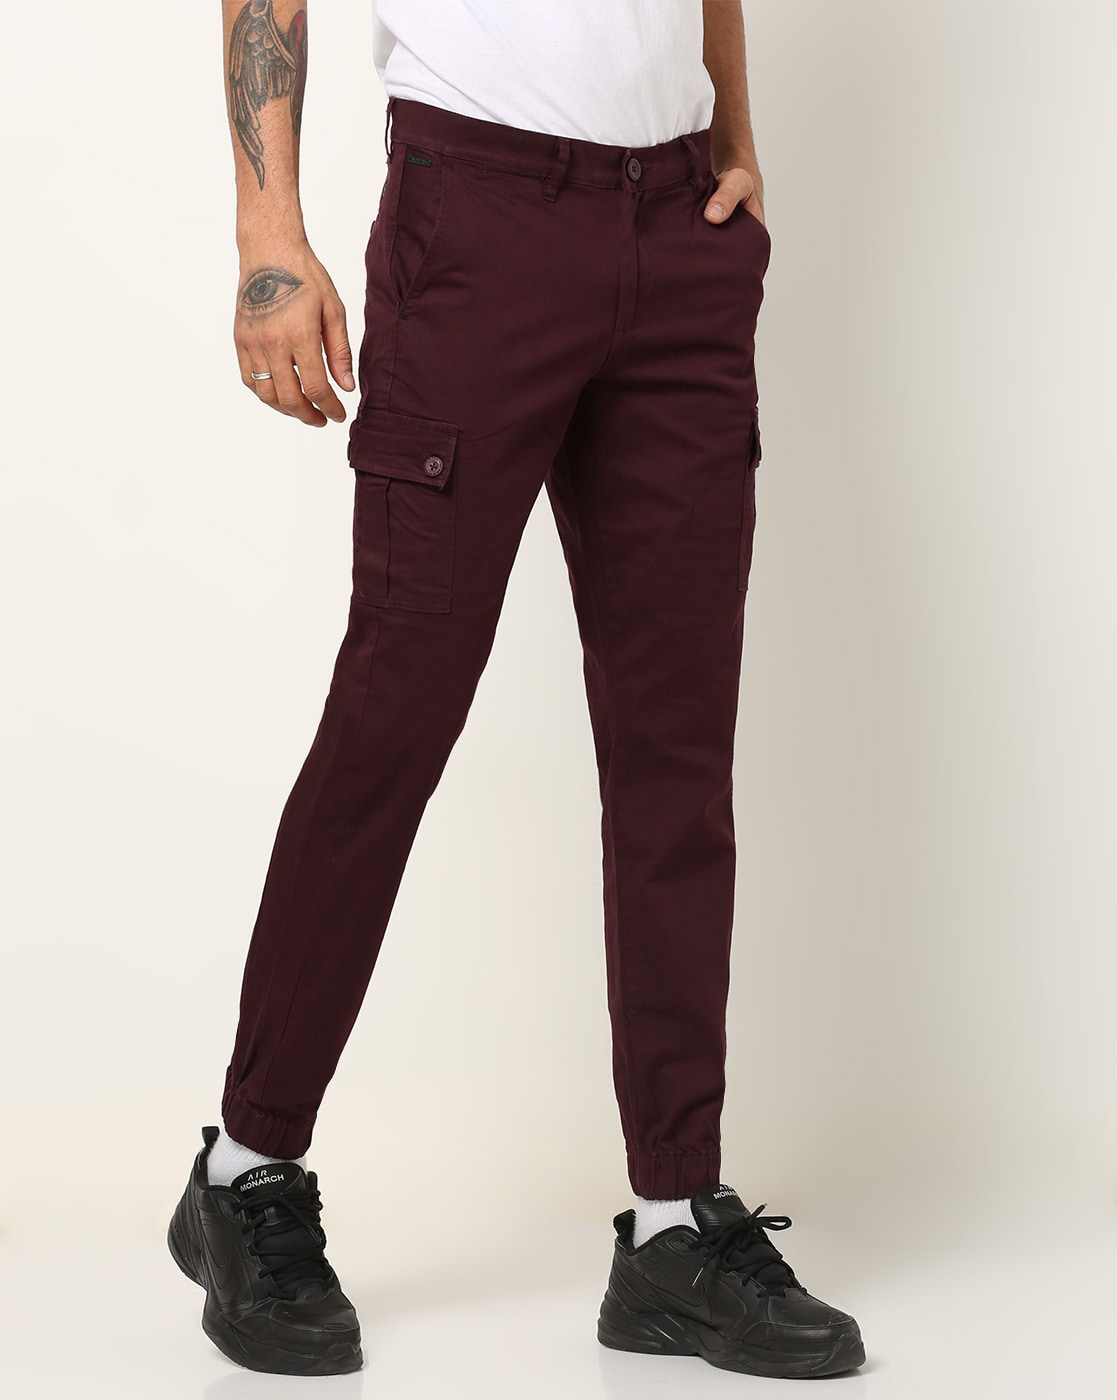 Combo Pack Of Womens Grey And Maroon Four Pocket Cotton Cargo Pants – QuaClo